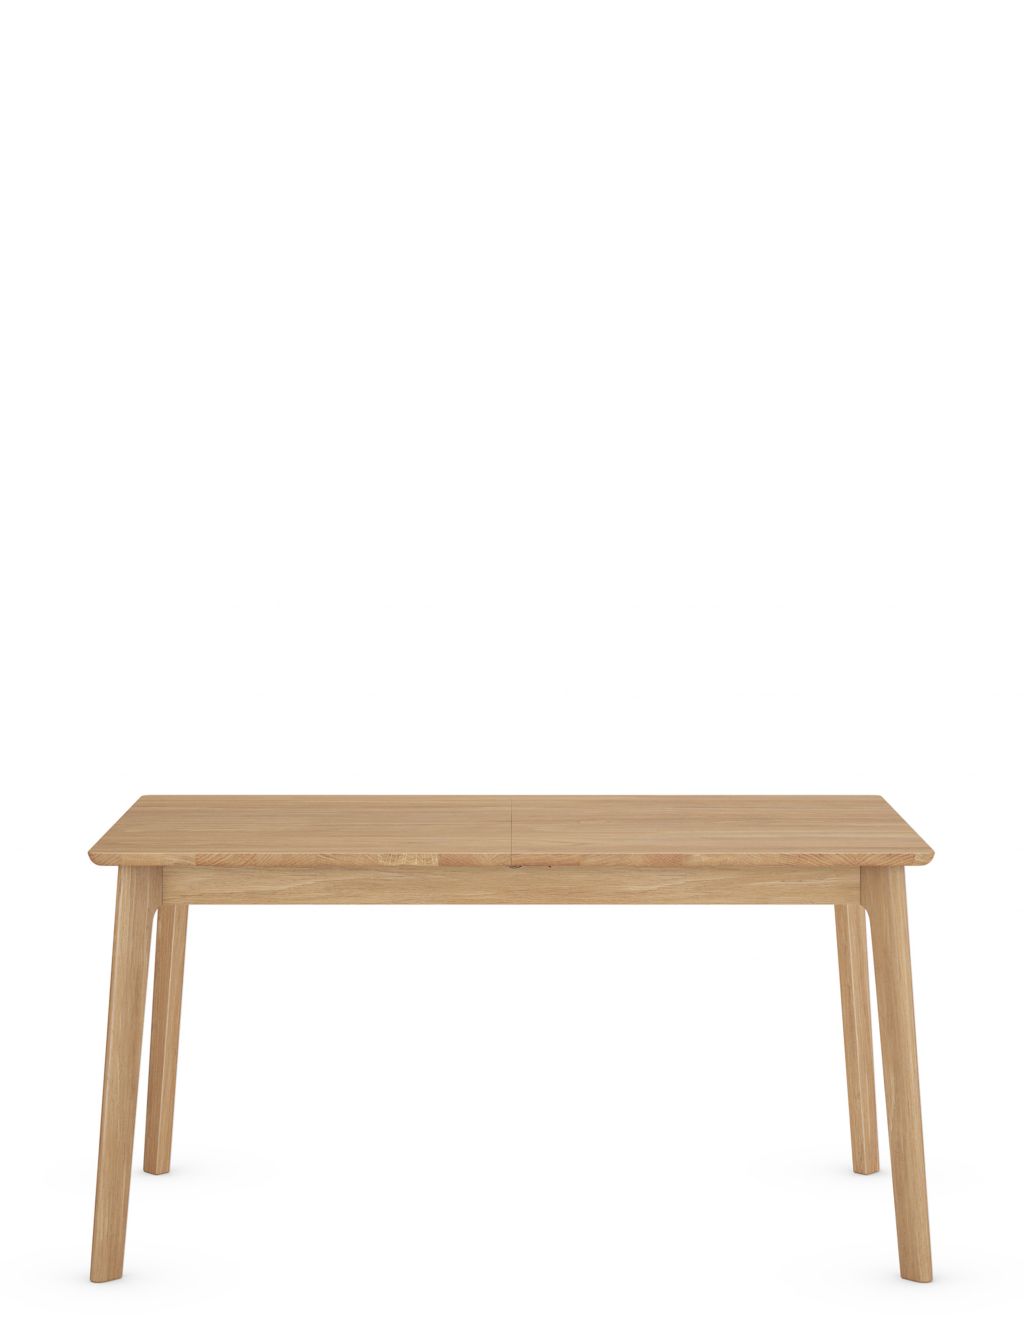 Nord 6-8 Seater Extending Dining Table image 2